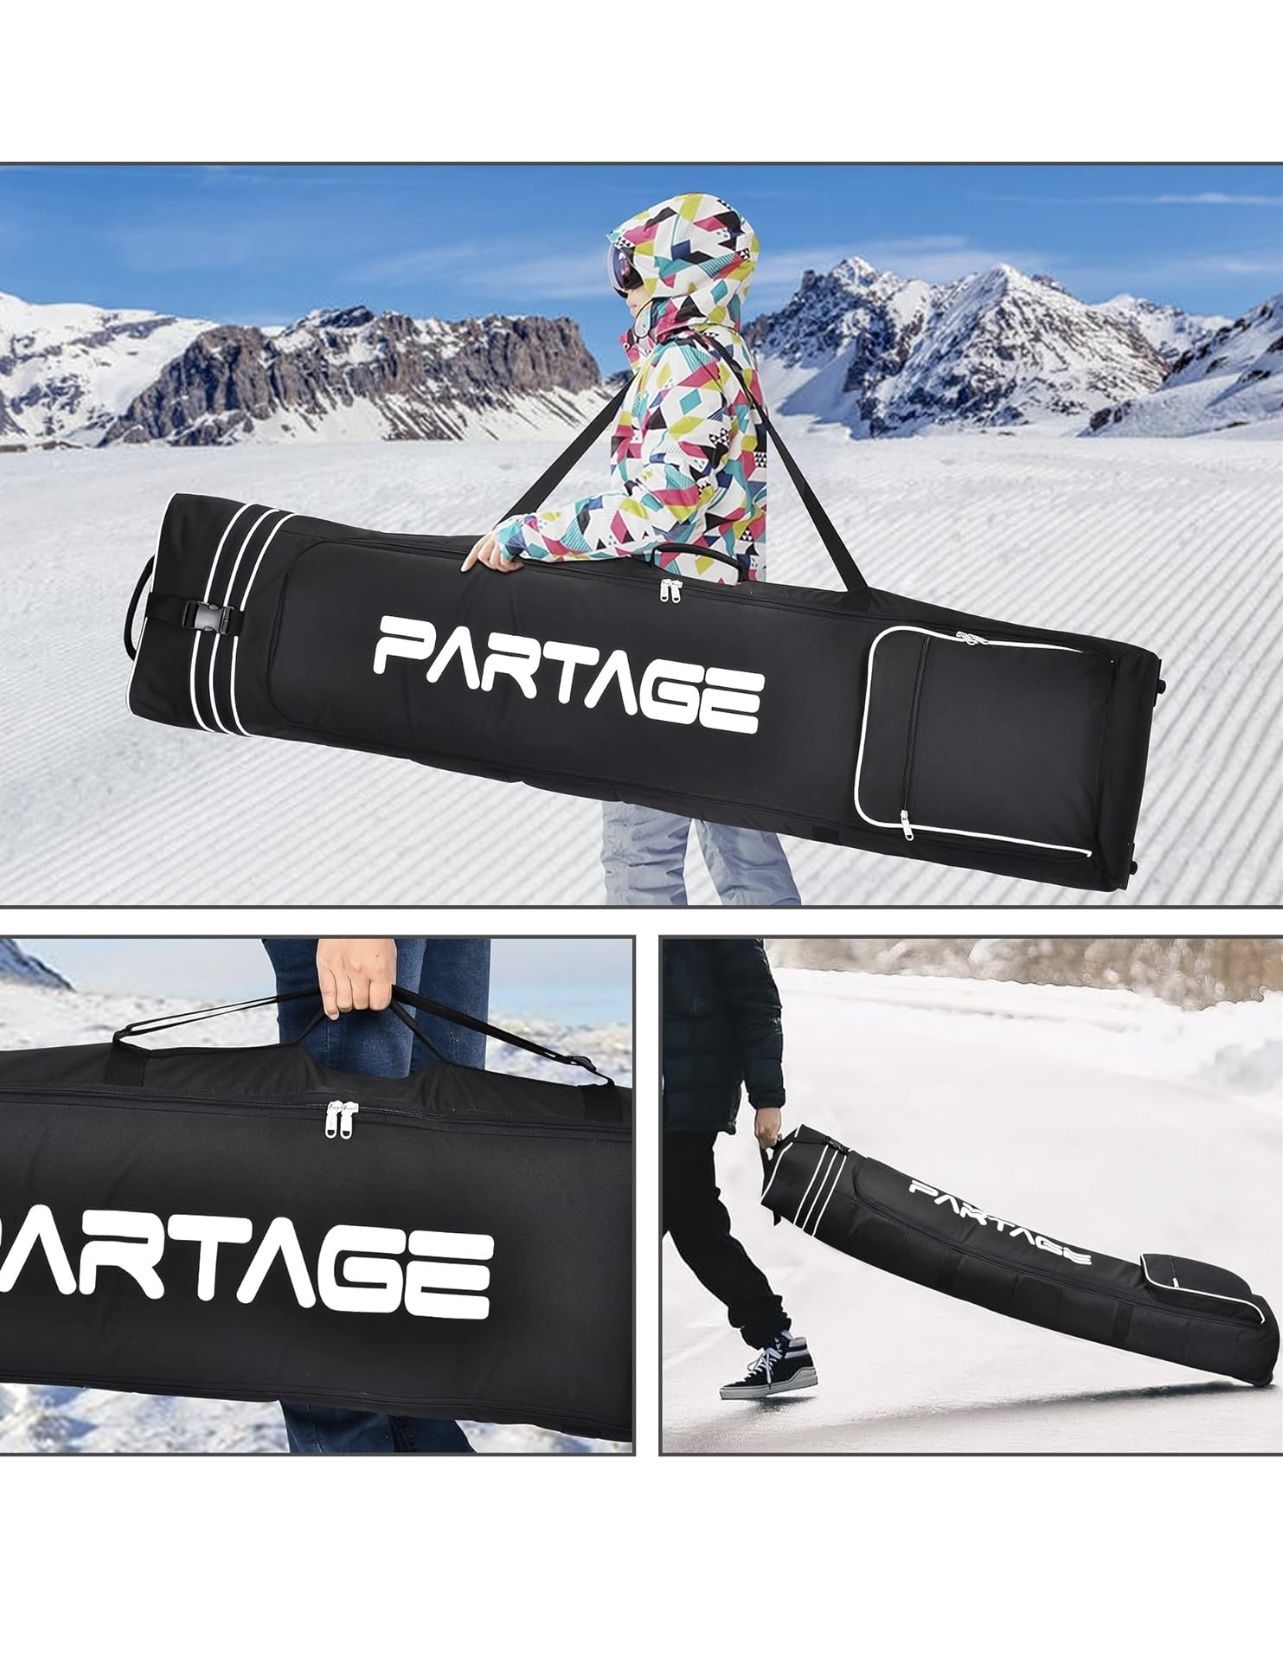 Snowboard Bag with Wheels, Snowboard Bag for Air Travel, Adjustable Length Up...